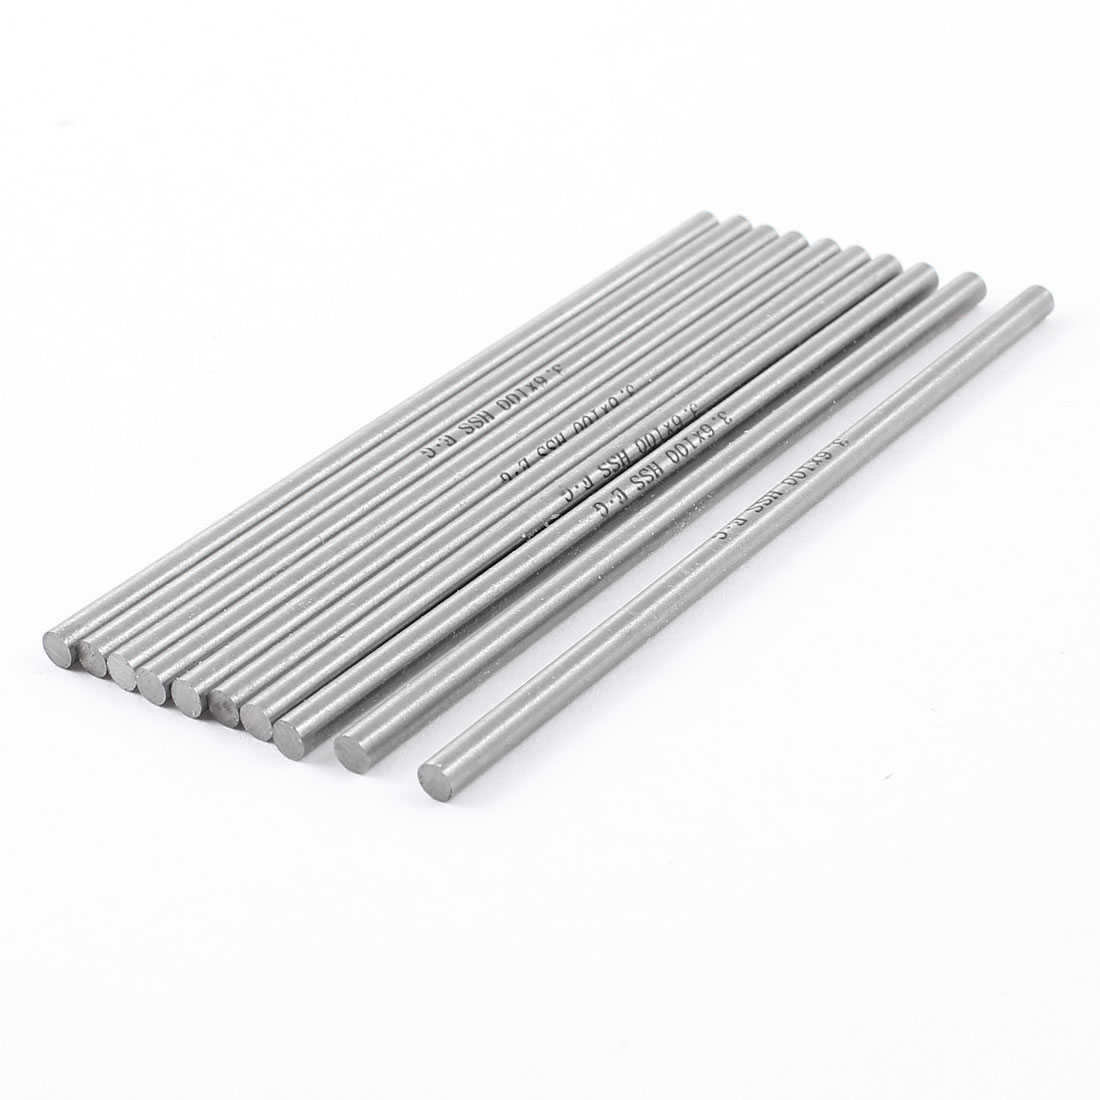 Unique Bargains 10 Pcs 3.6mm x 100mm HSS Grooving Tool Round Turning Lathe Bars Silver Gray